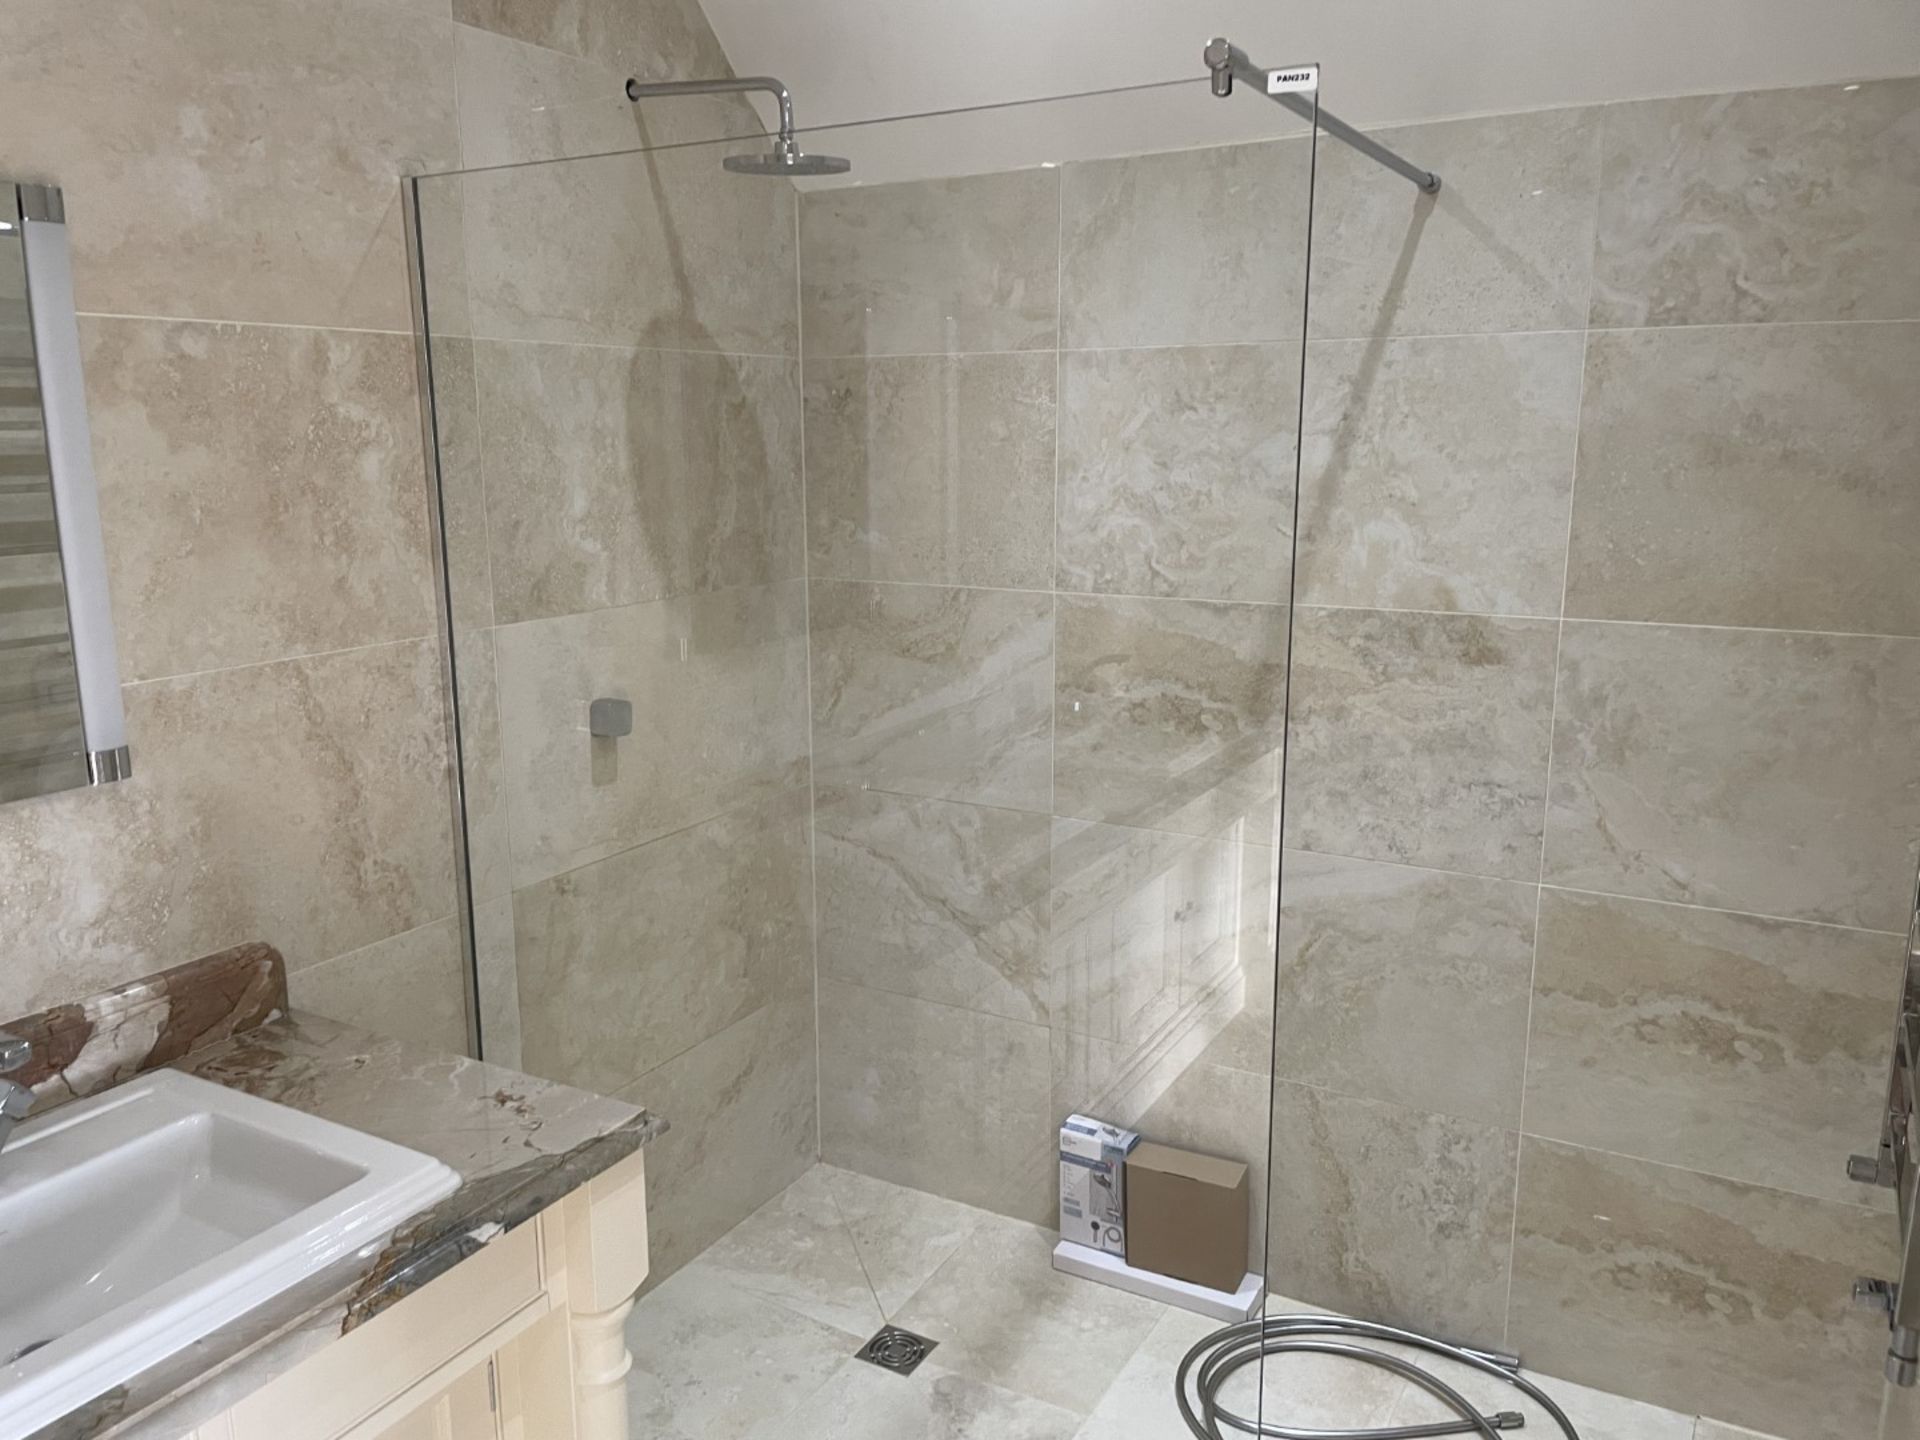 1 x Premium Shower and Enclosure + Hansgrove Controls and Thermostat - Ref: PAN232 - CL896 - NO - Image 13 of 21